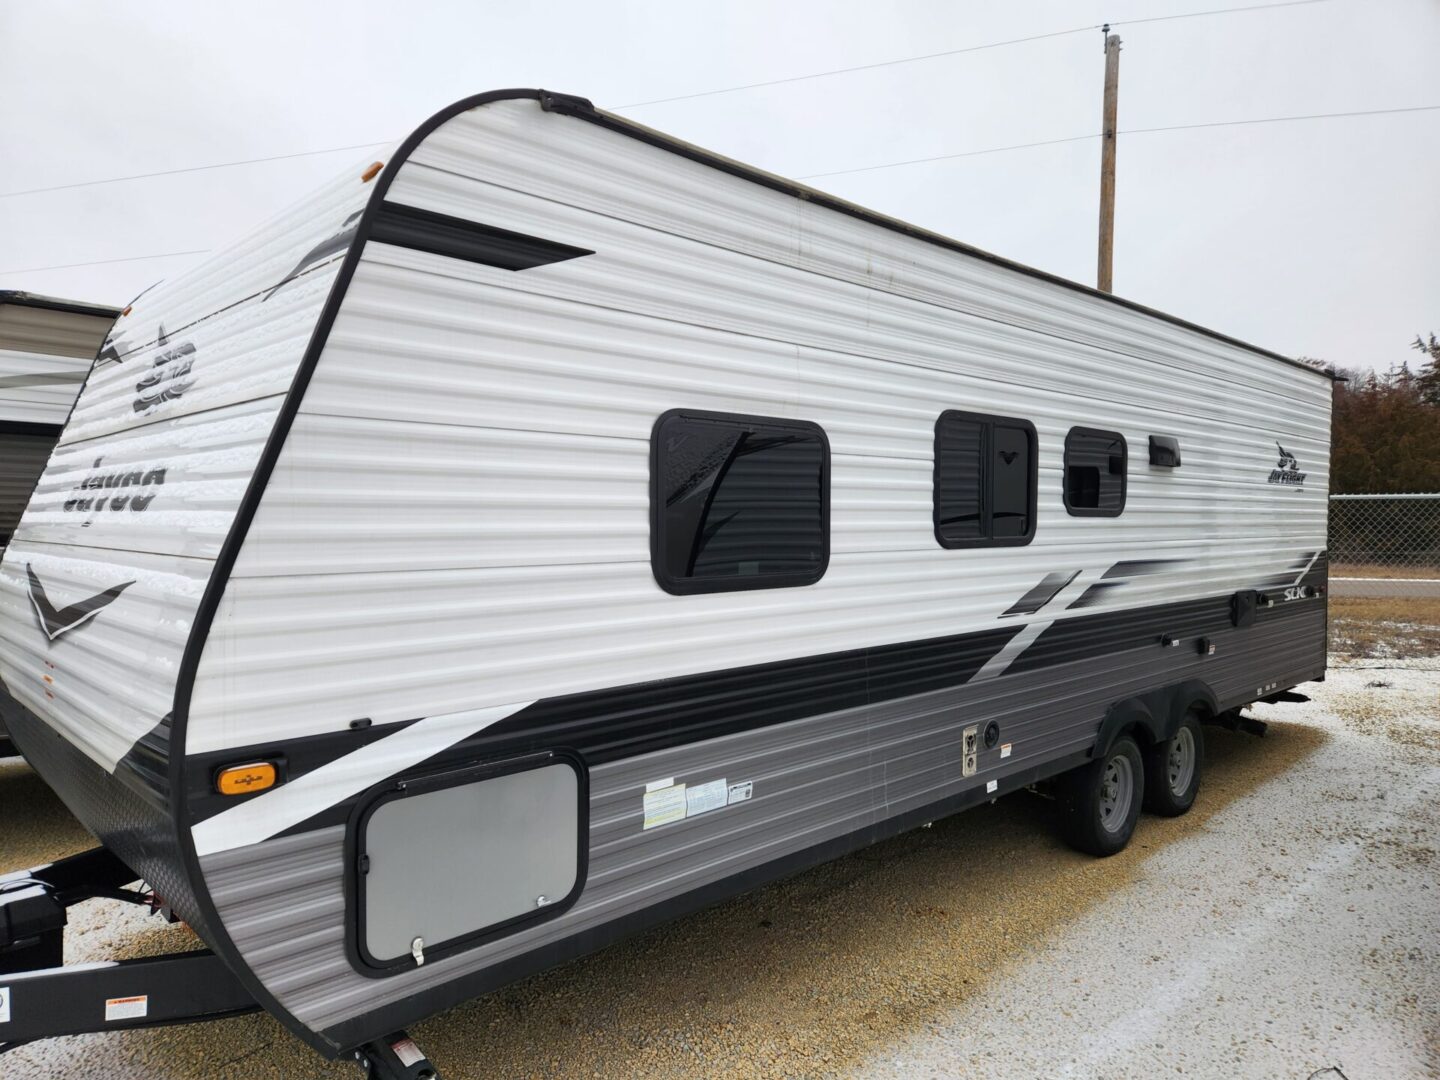 Airstream travel trailer with black and white exterior.